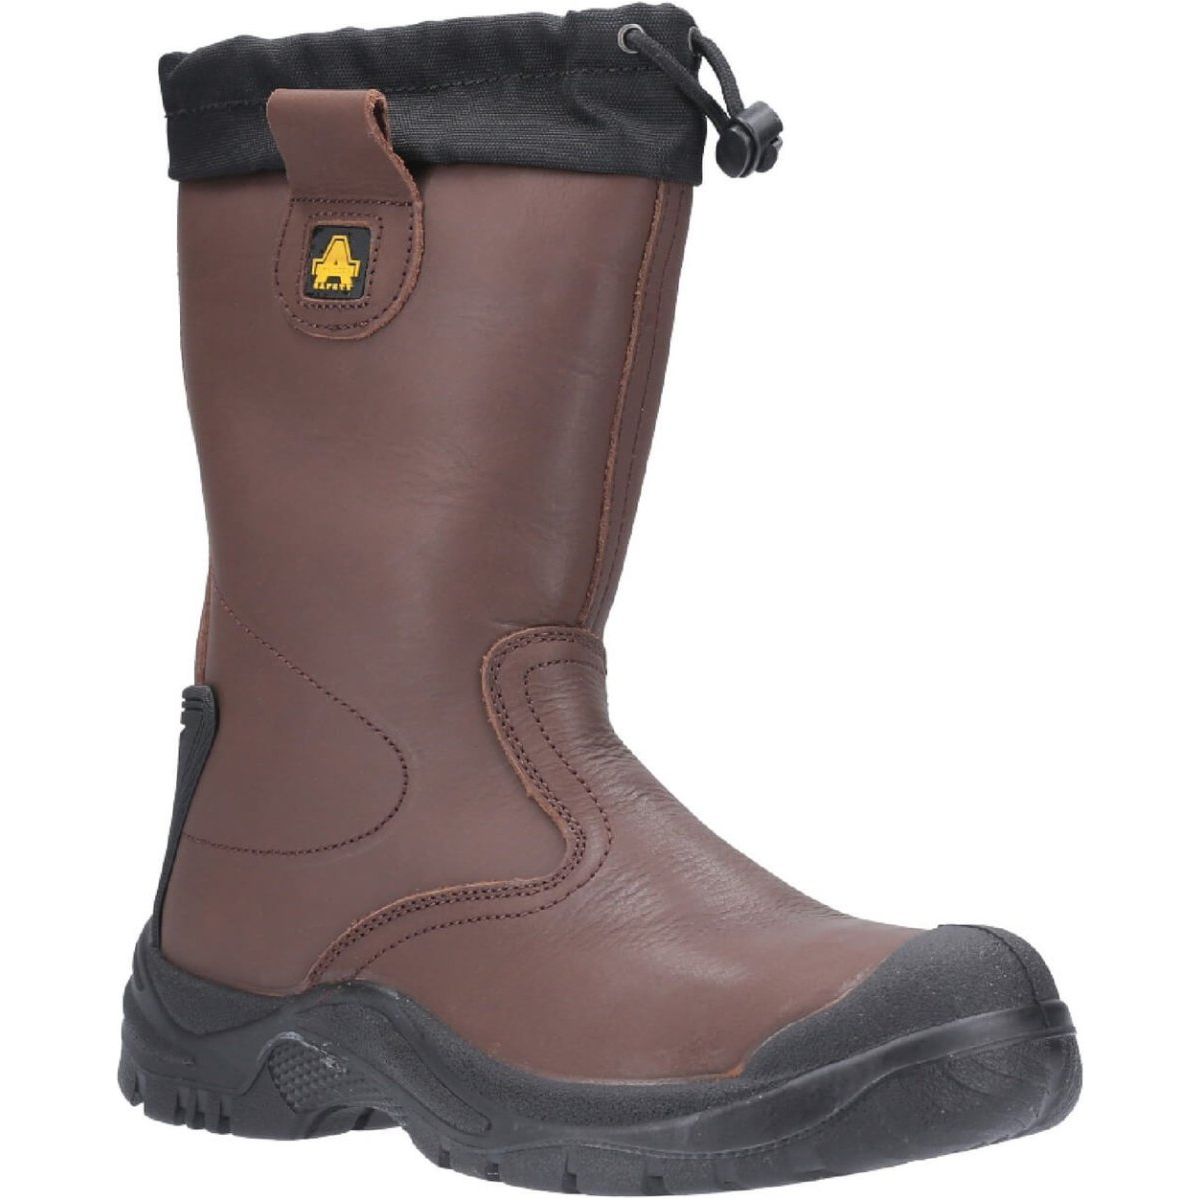 Amblers Fs245 Antistatic Safety Rigger Boots Mens - workweargurus.com